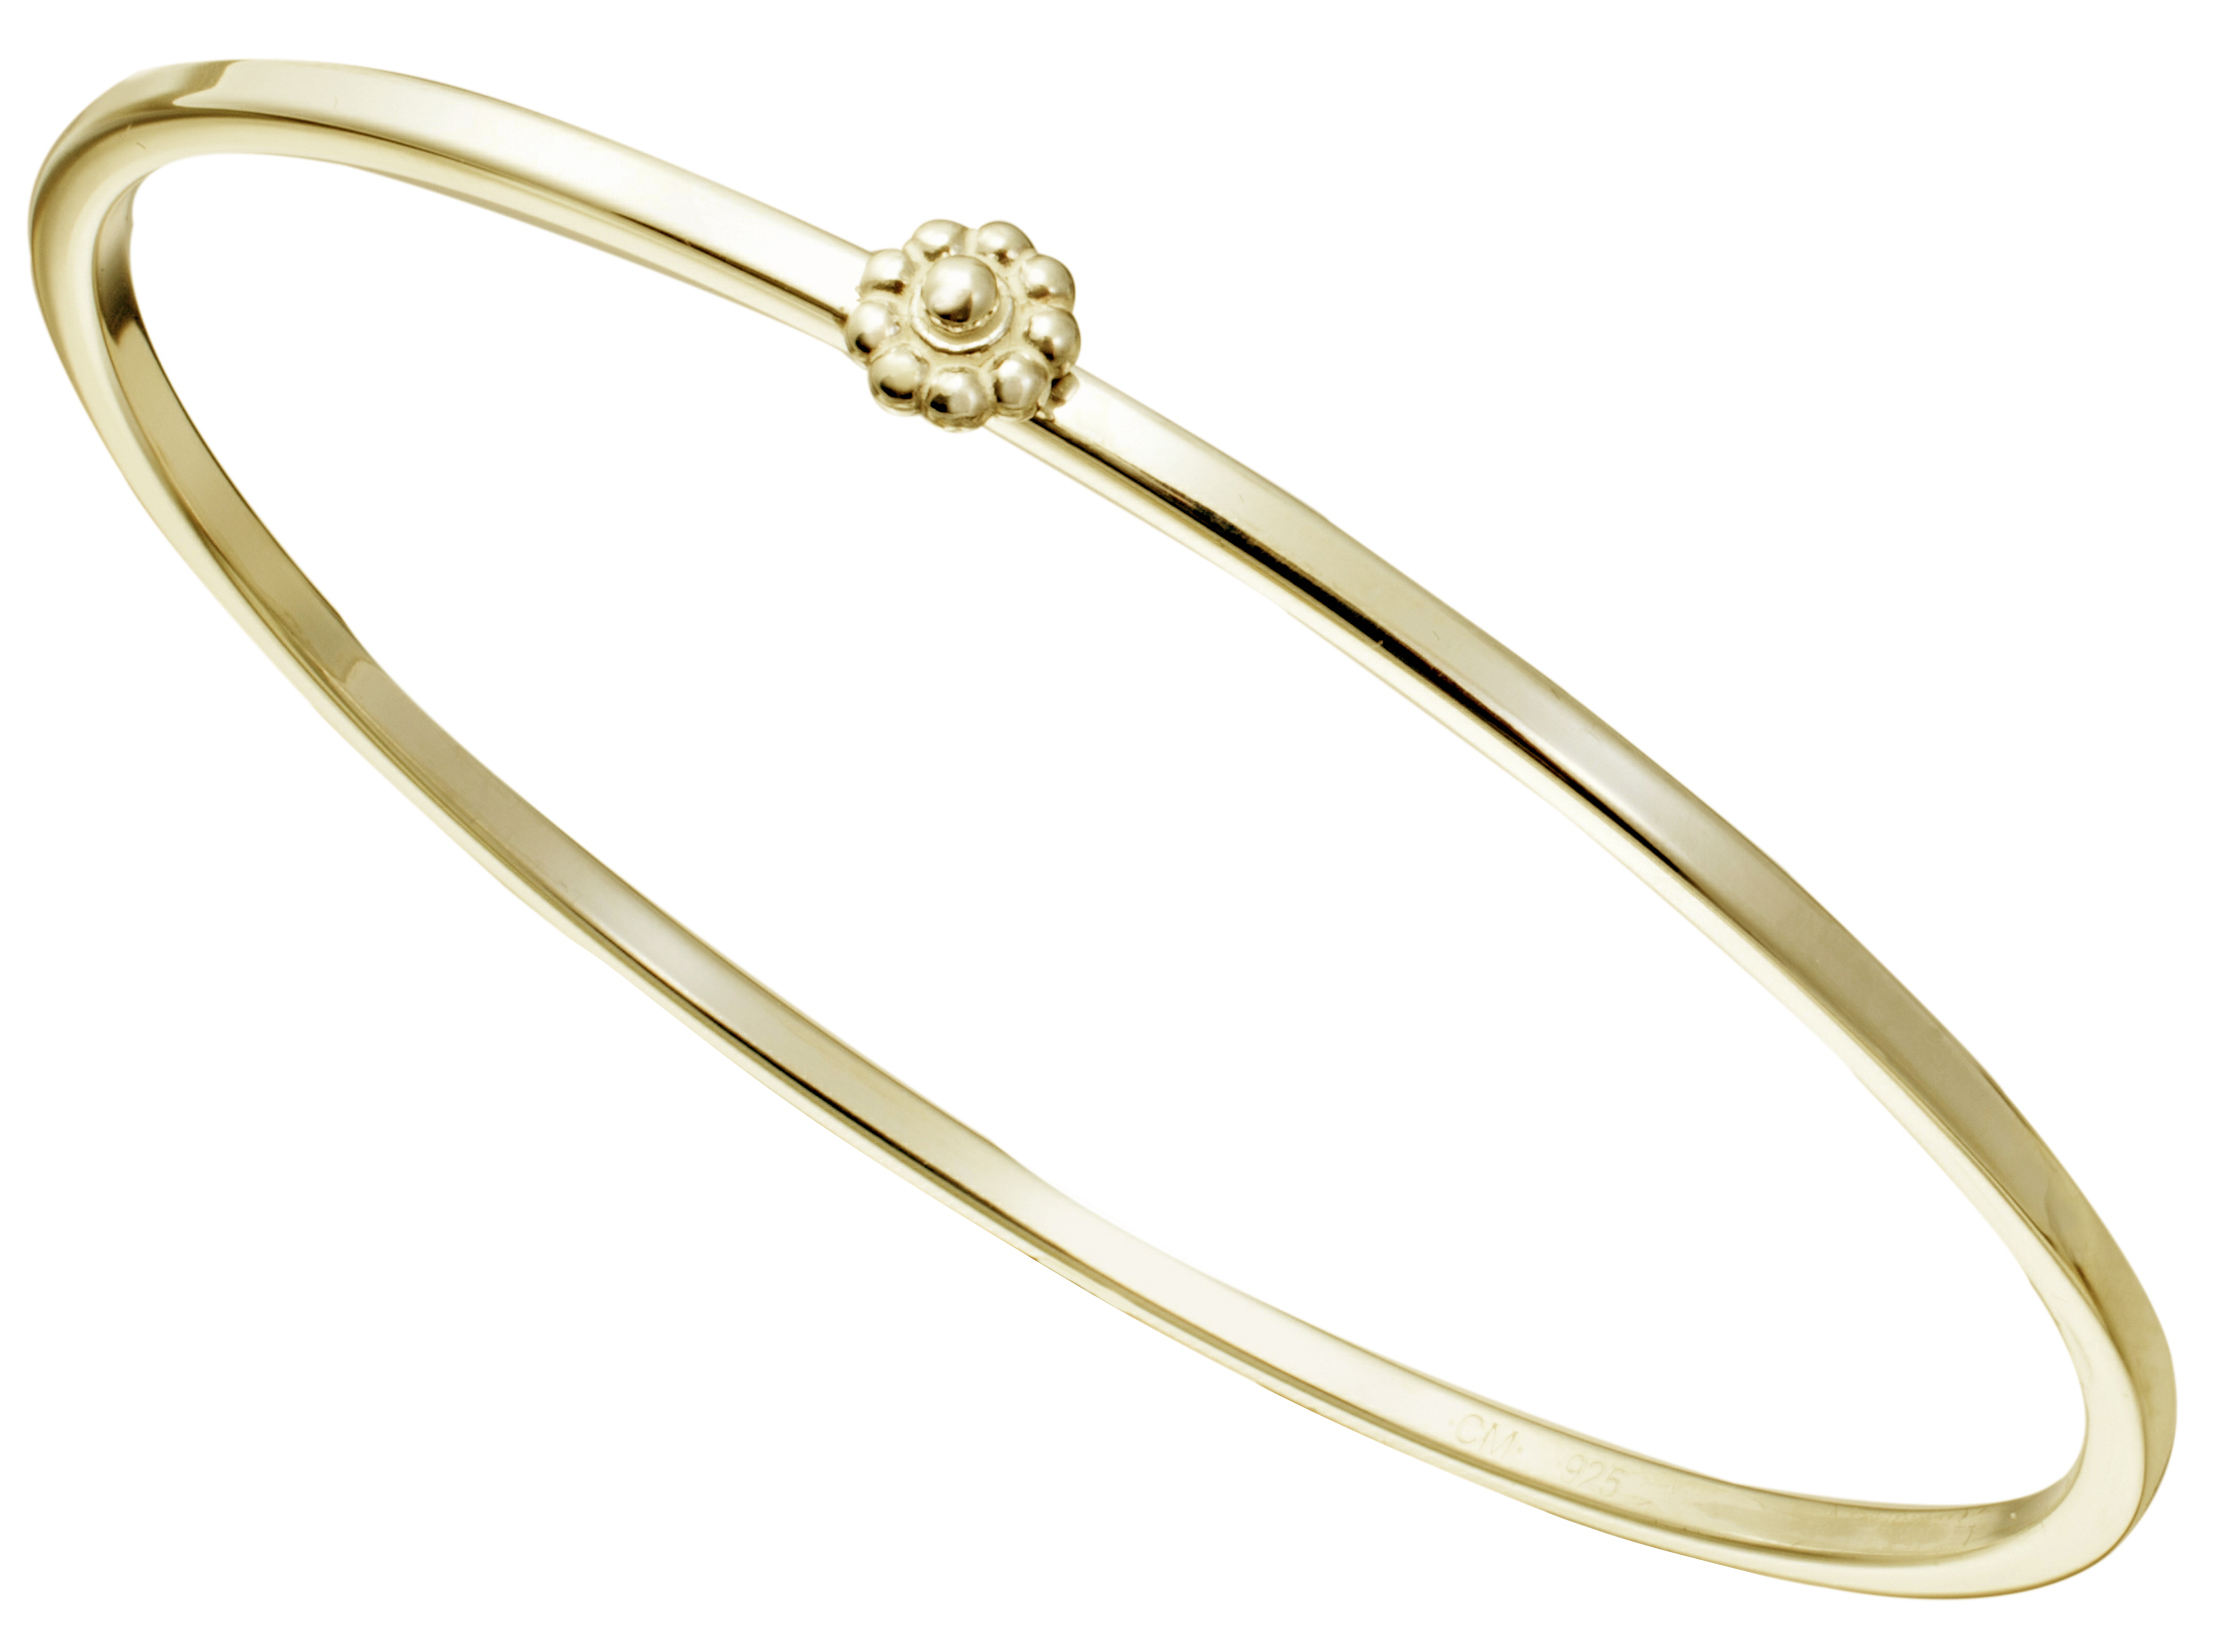 Yellow Gold Rosette Bangle by Christina Malle